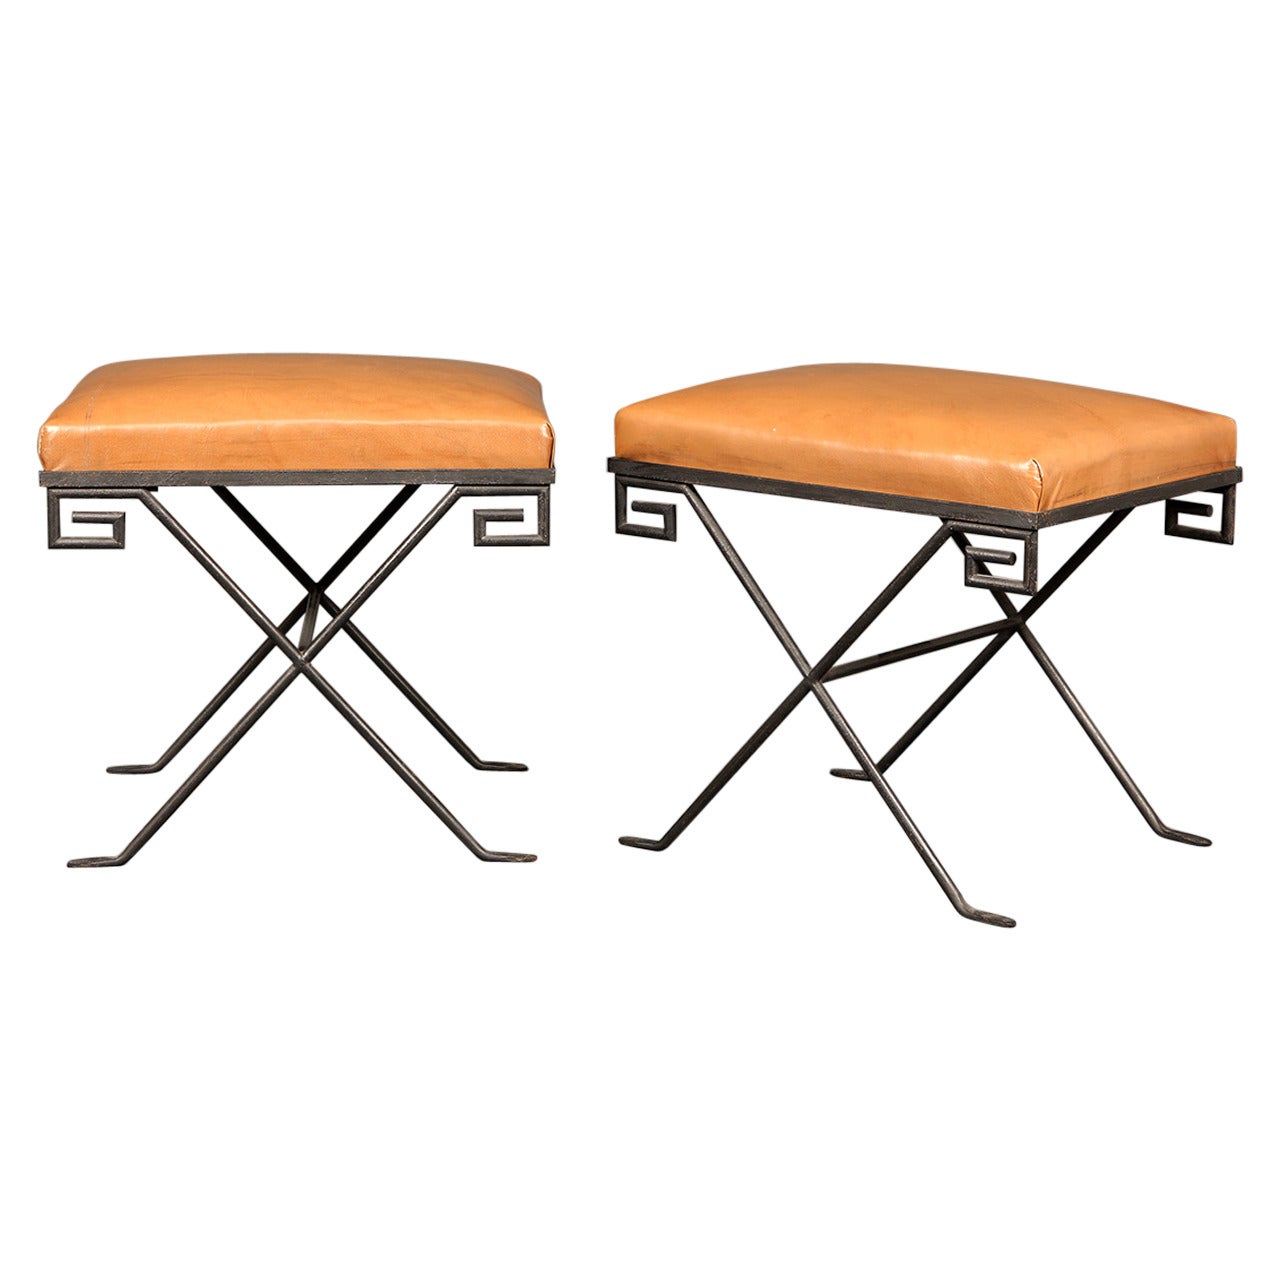 Pair of Jean Michel Frank Stools For Sale